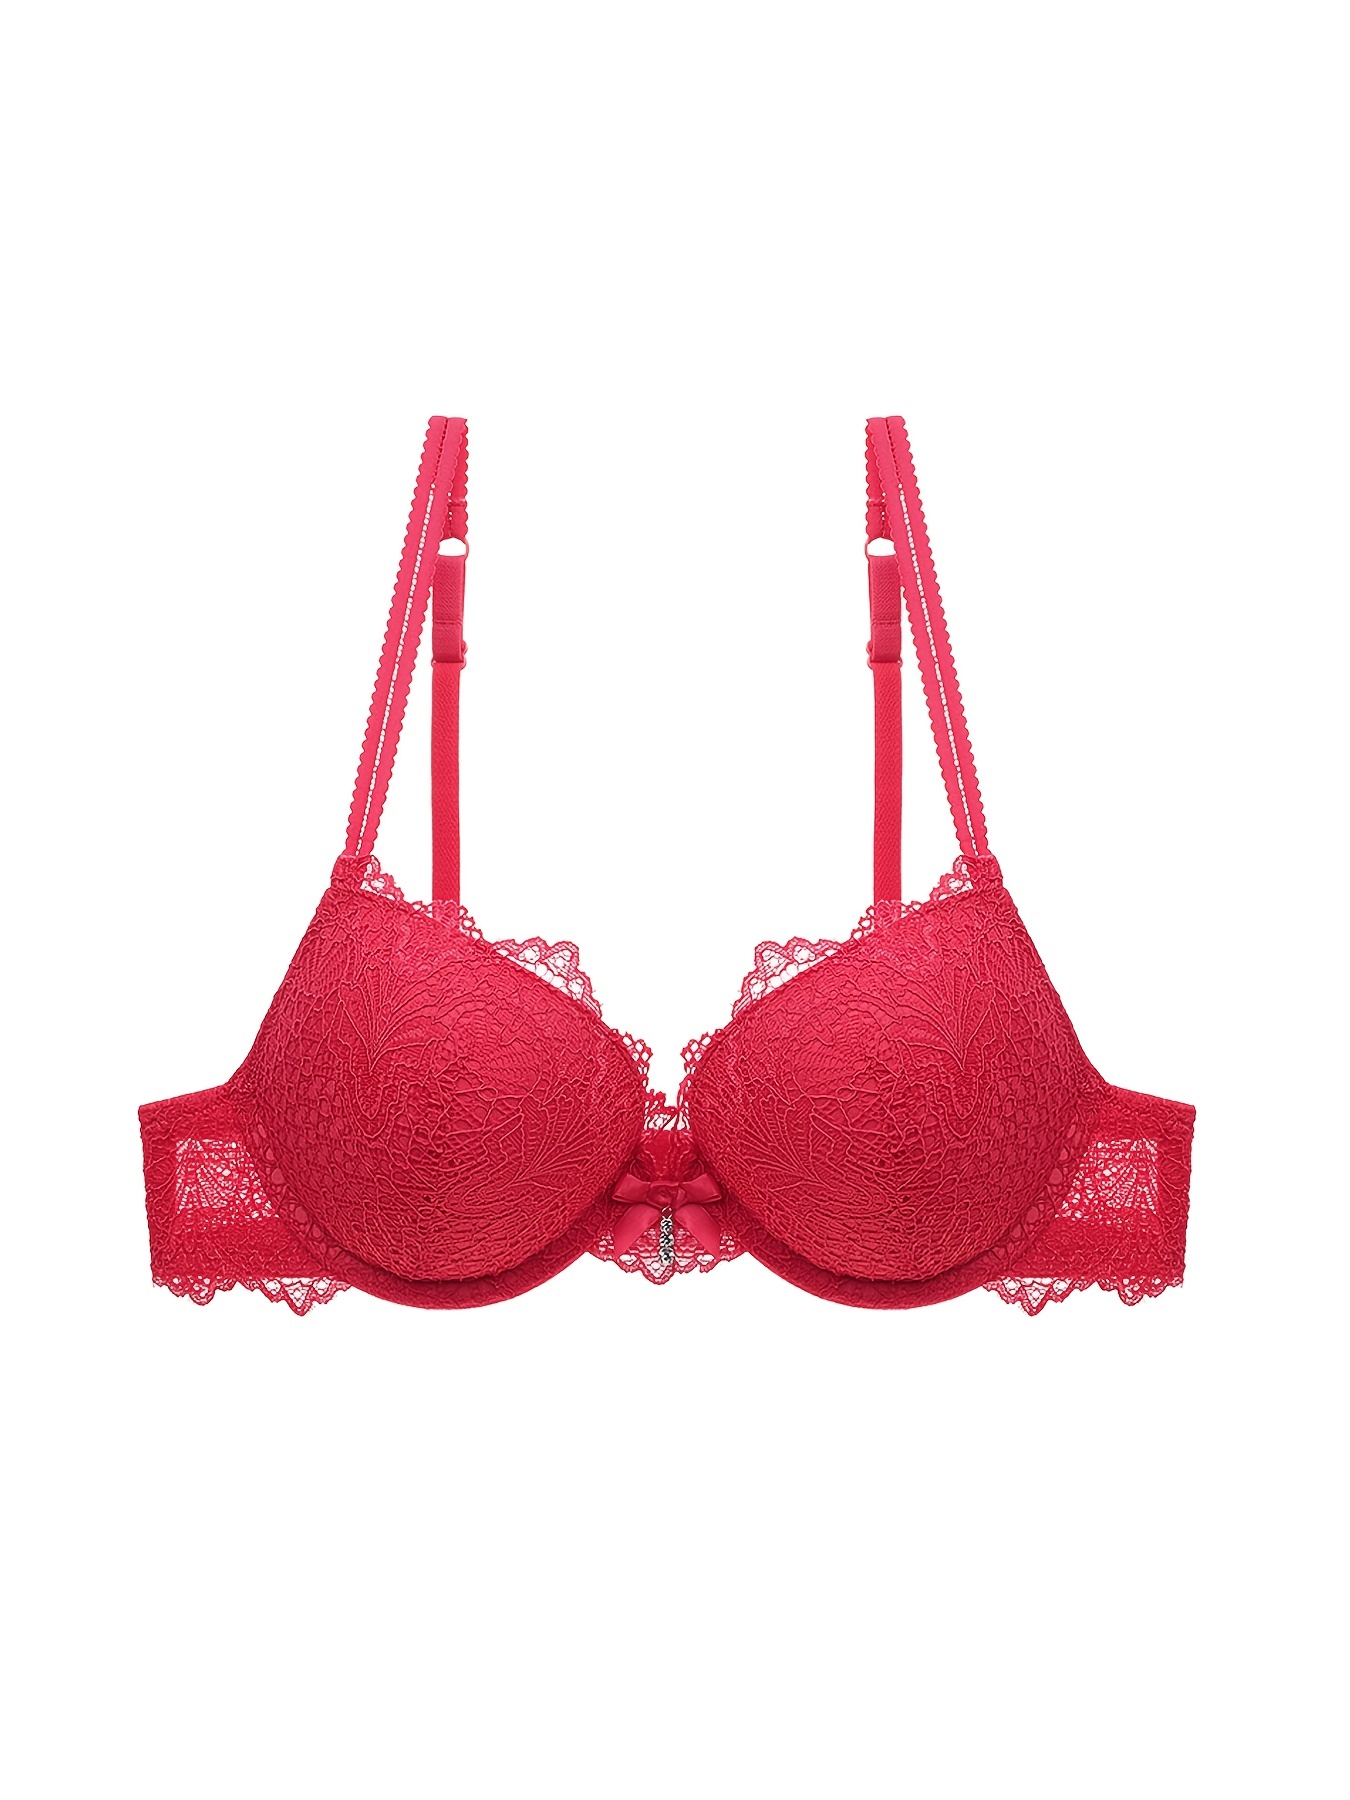 Buy Online Stylish Lace with Middle Flower Padded Bra for Ladies at